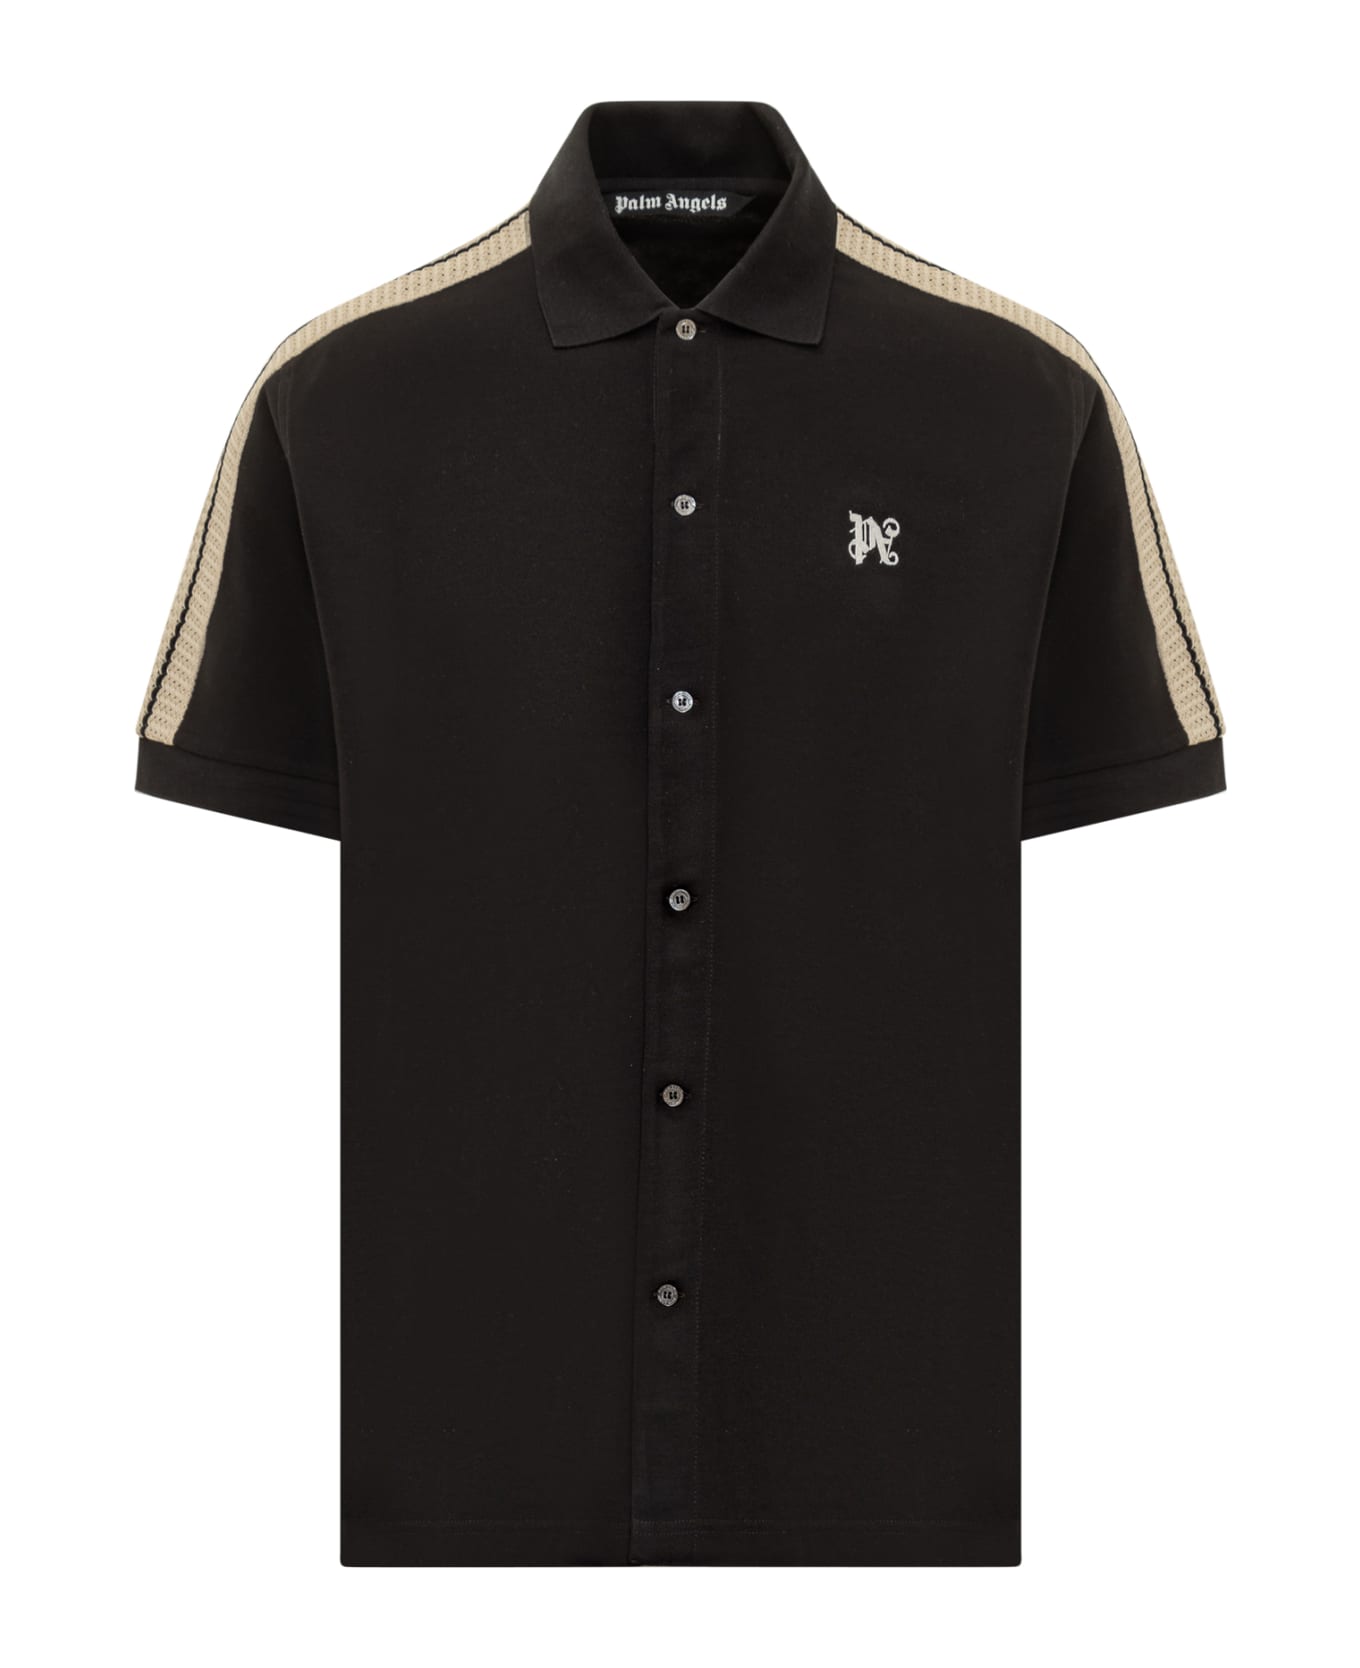 Palm Angels Monogram Track Polo - BLACK OFF WHITE ポロシャツ